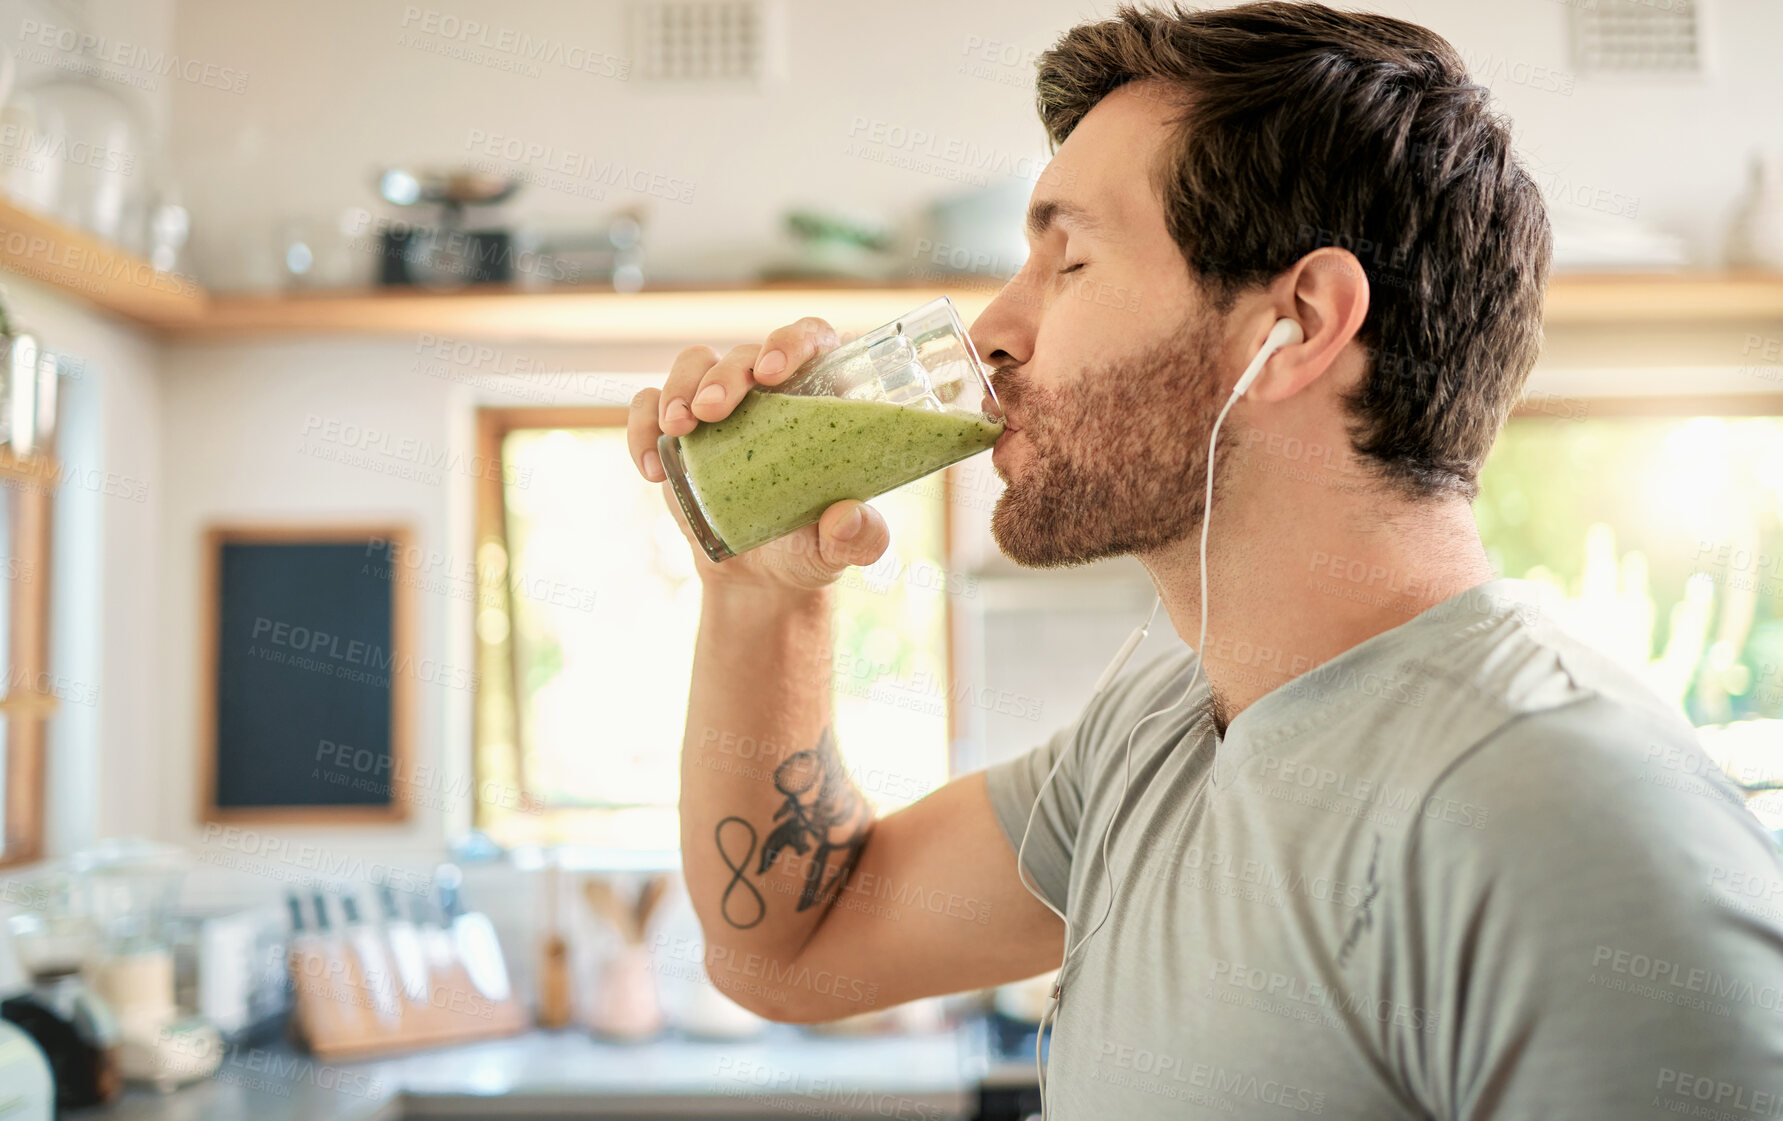 Buy stock photo One fit young caucasian man drinking a glass of healthy green detox smoothie while wearing earphones in a kitchen at home. Guy having fresh fruit juice to cleanse and provide energy for training. Wholesome drink with vitamins and nutrients